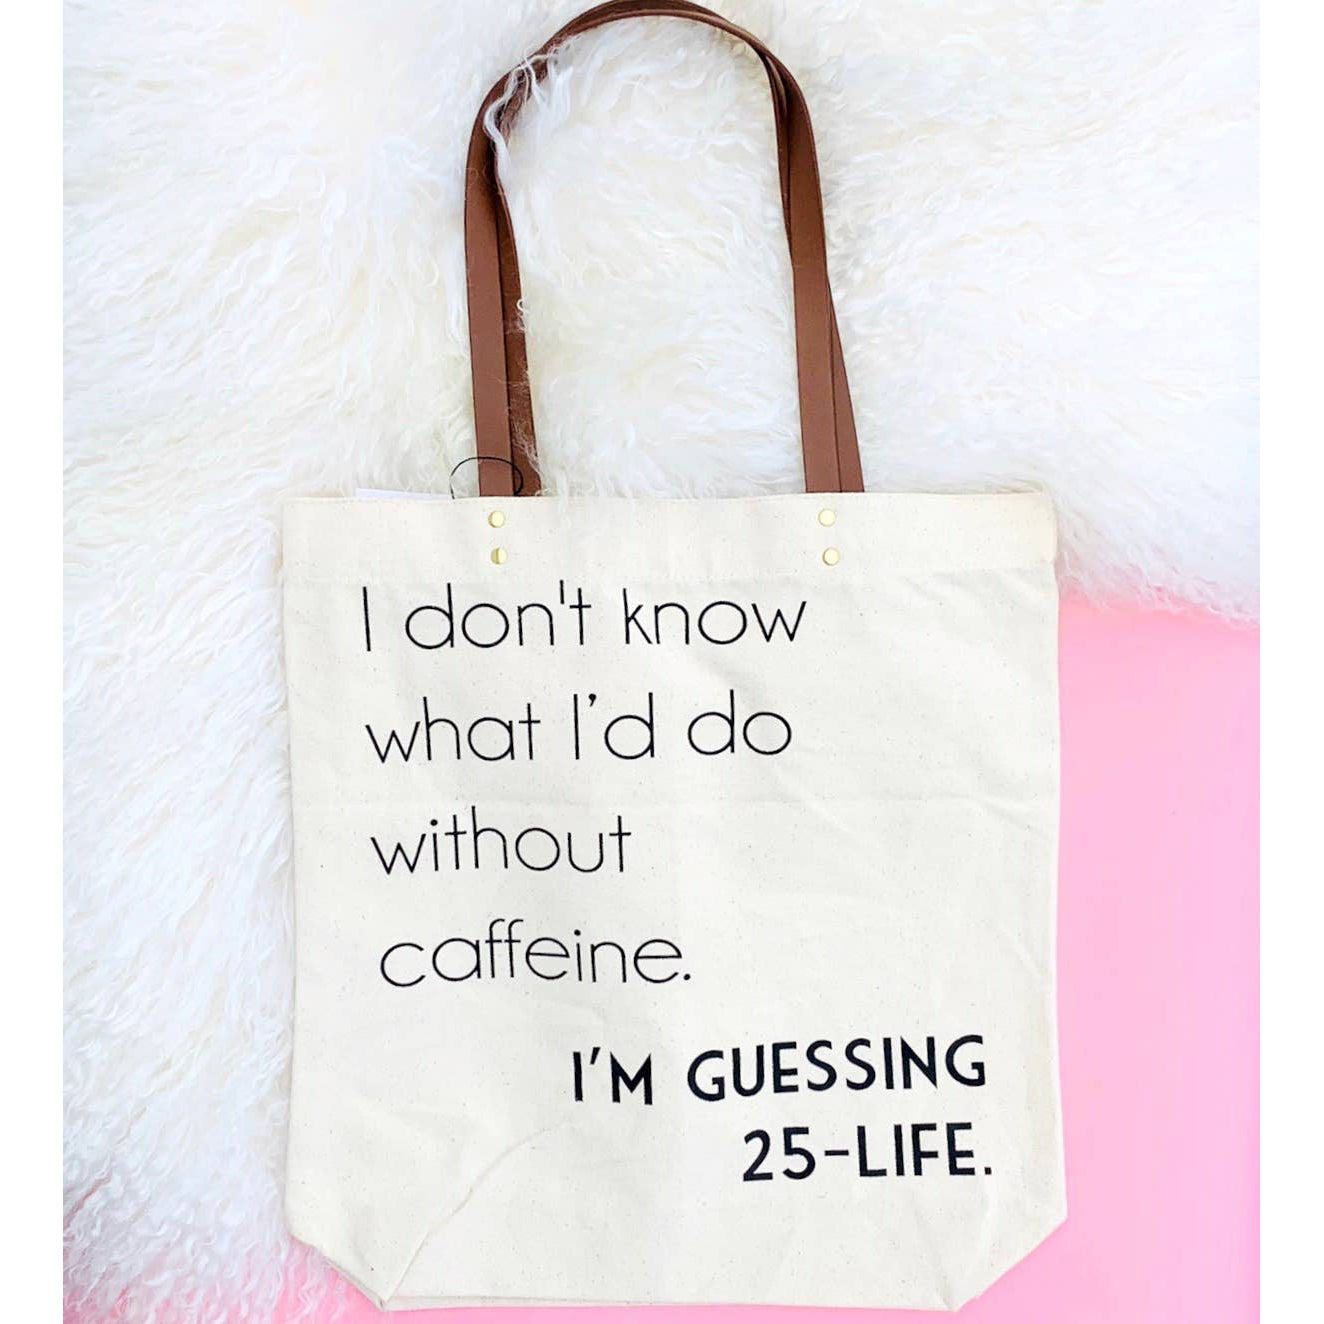 I Don't Know What I'd Do Without Caffeine Canvas Tote Bag | Vegan Leather Handles